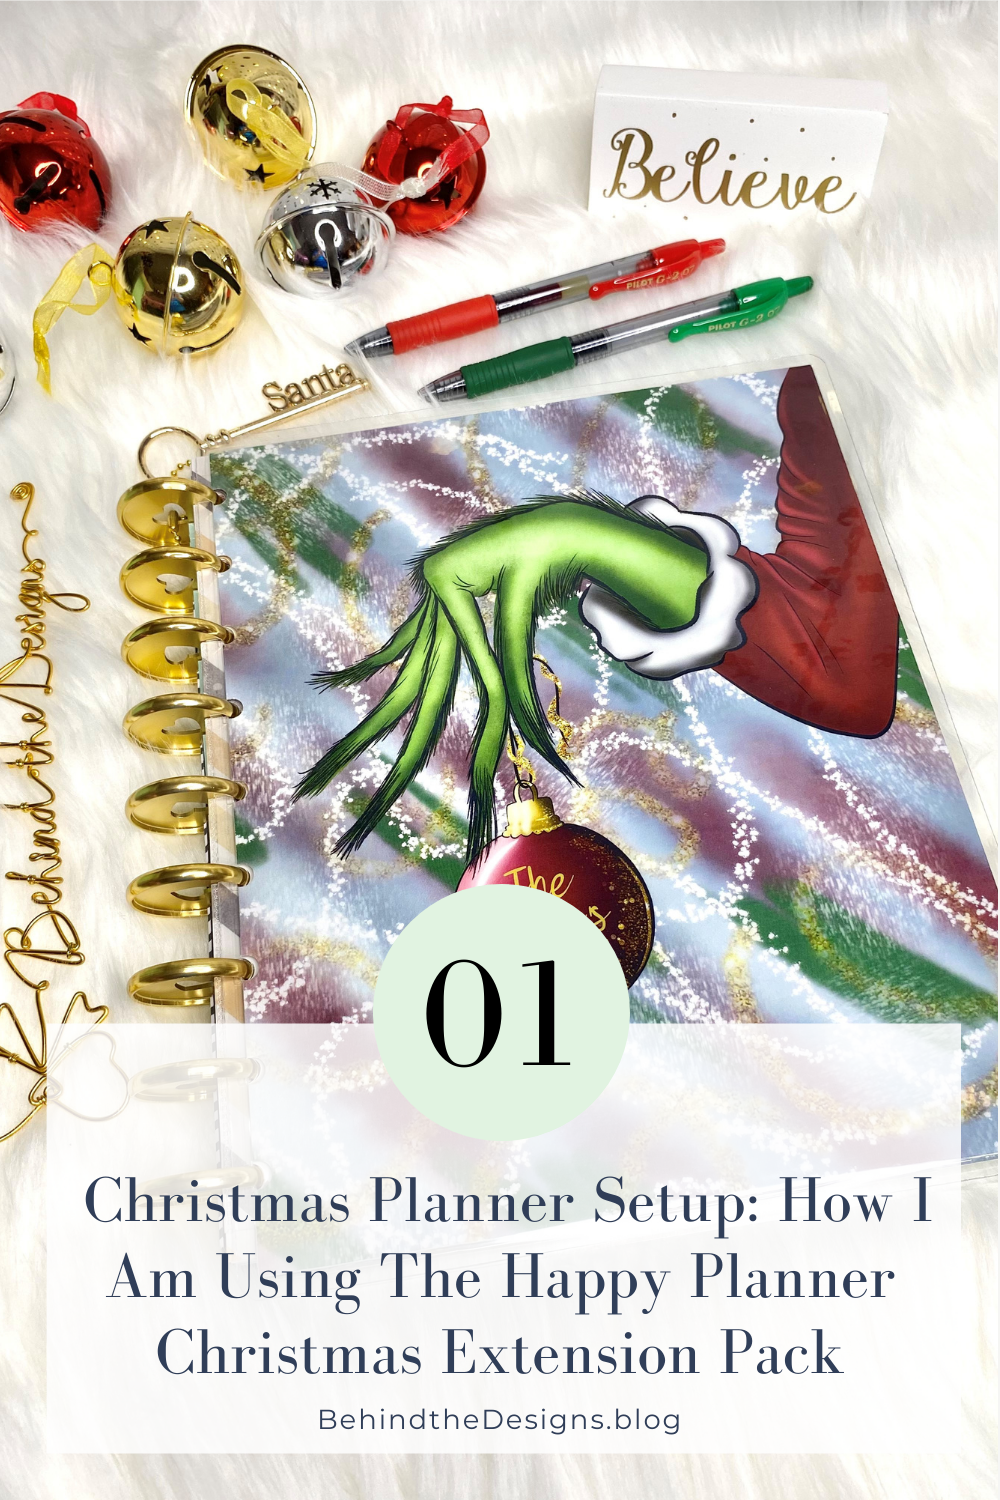 Holiday Christmas Planner Setup in a Happy Planner